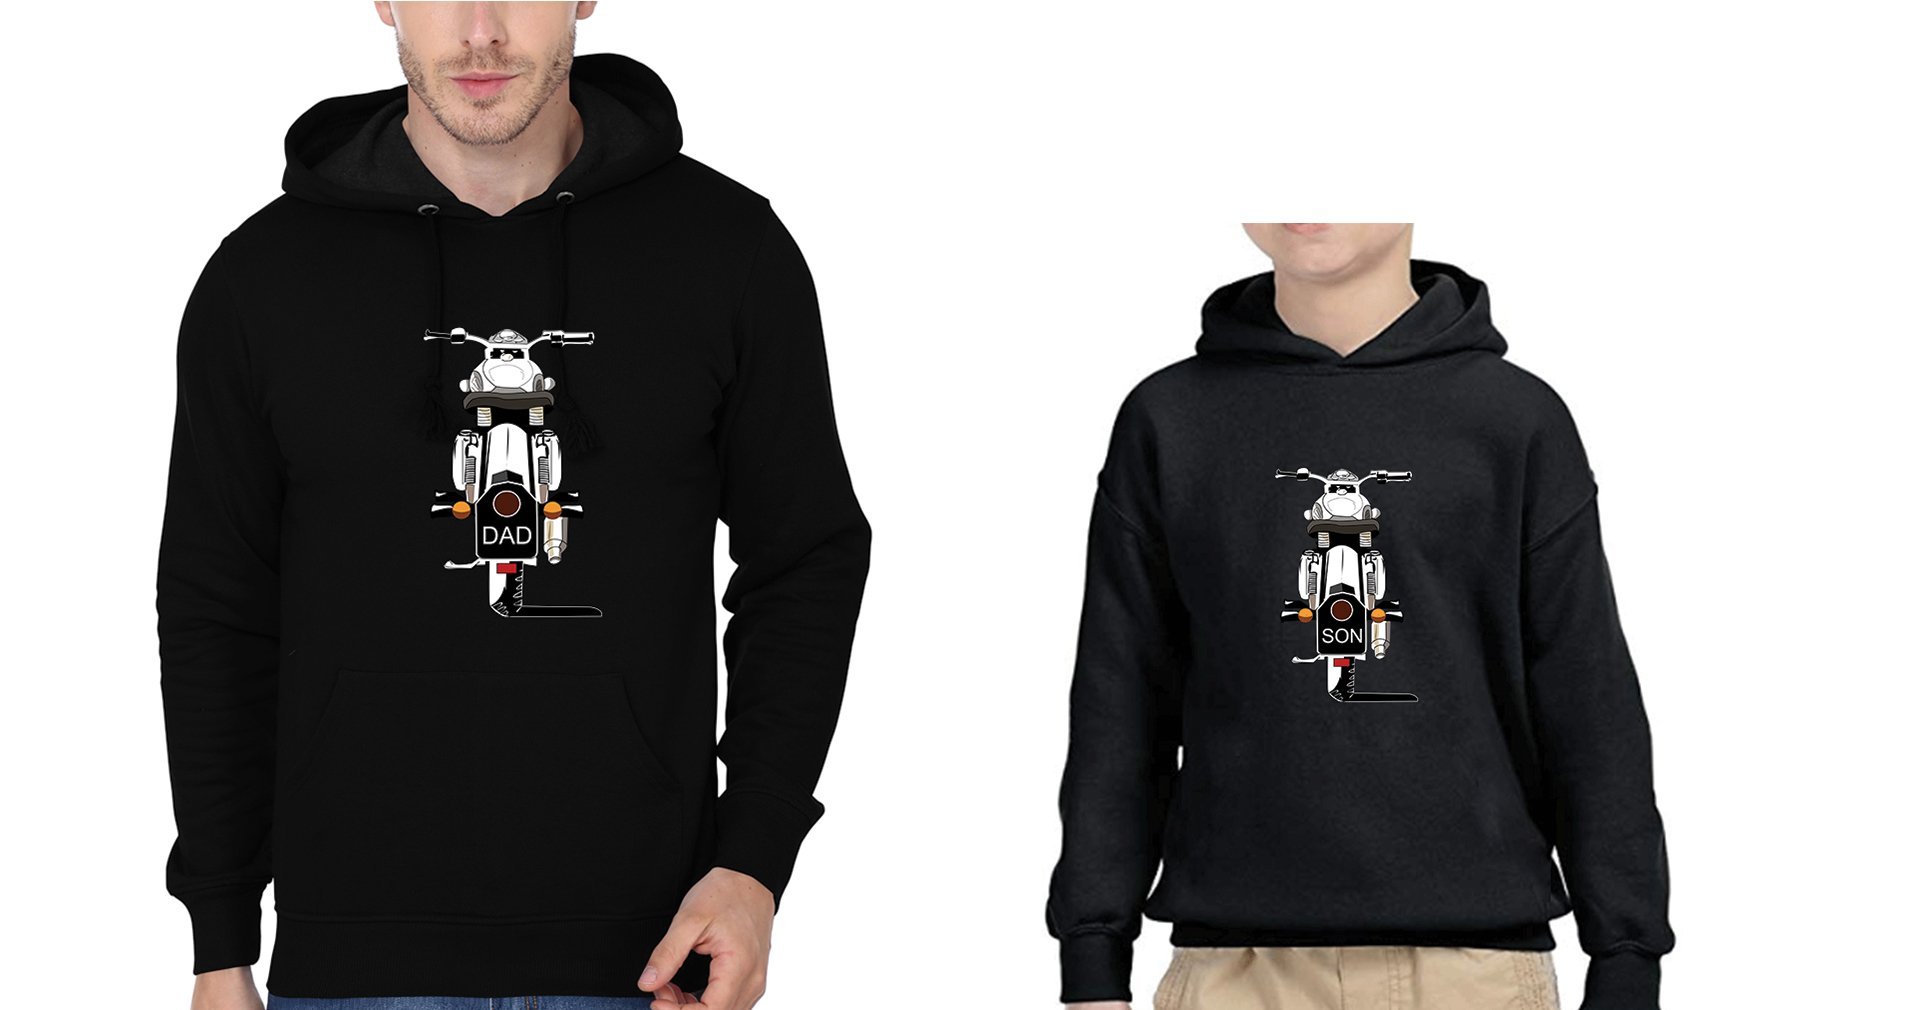 Dad Son Bullet Father and Son Matching Hoodies- FunkyTradition - FunkyTradition